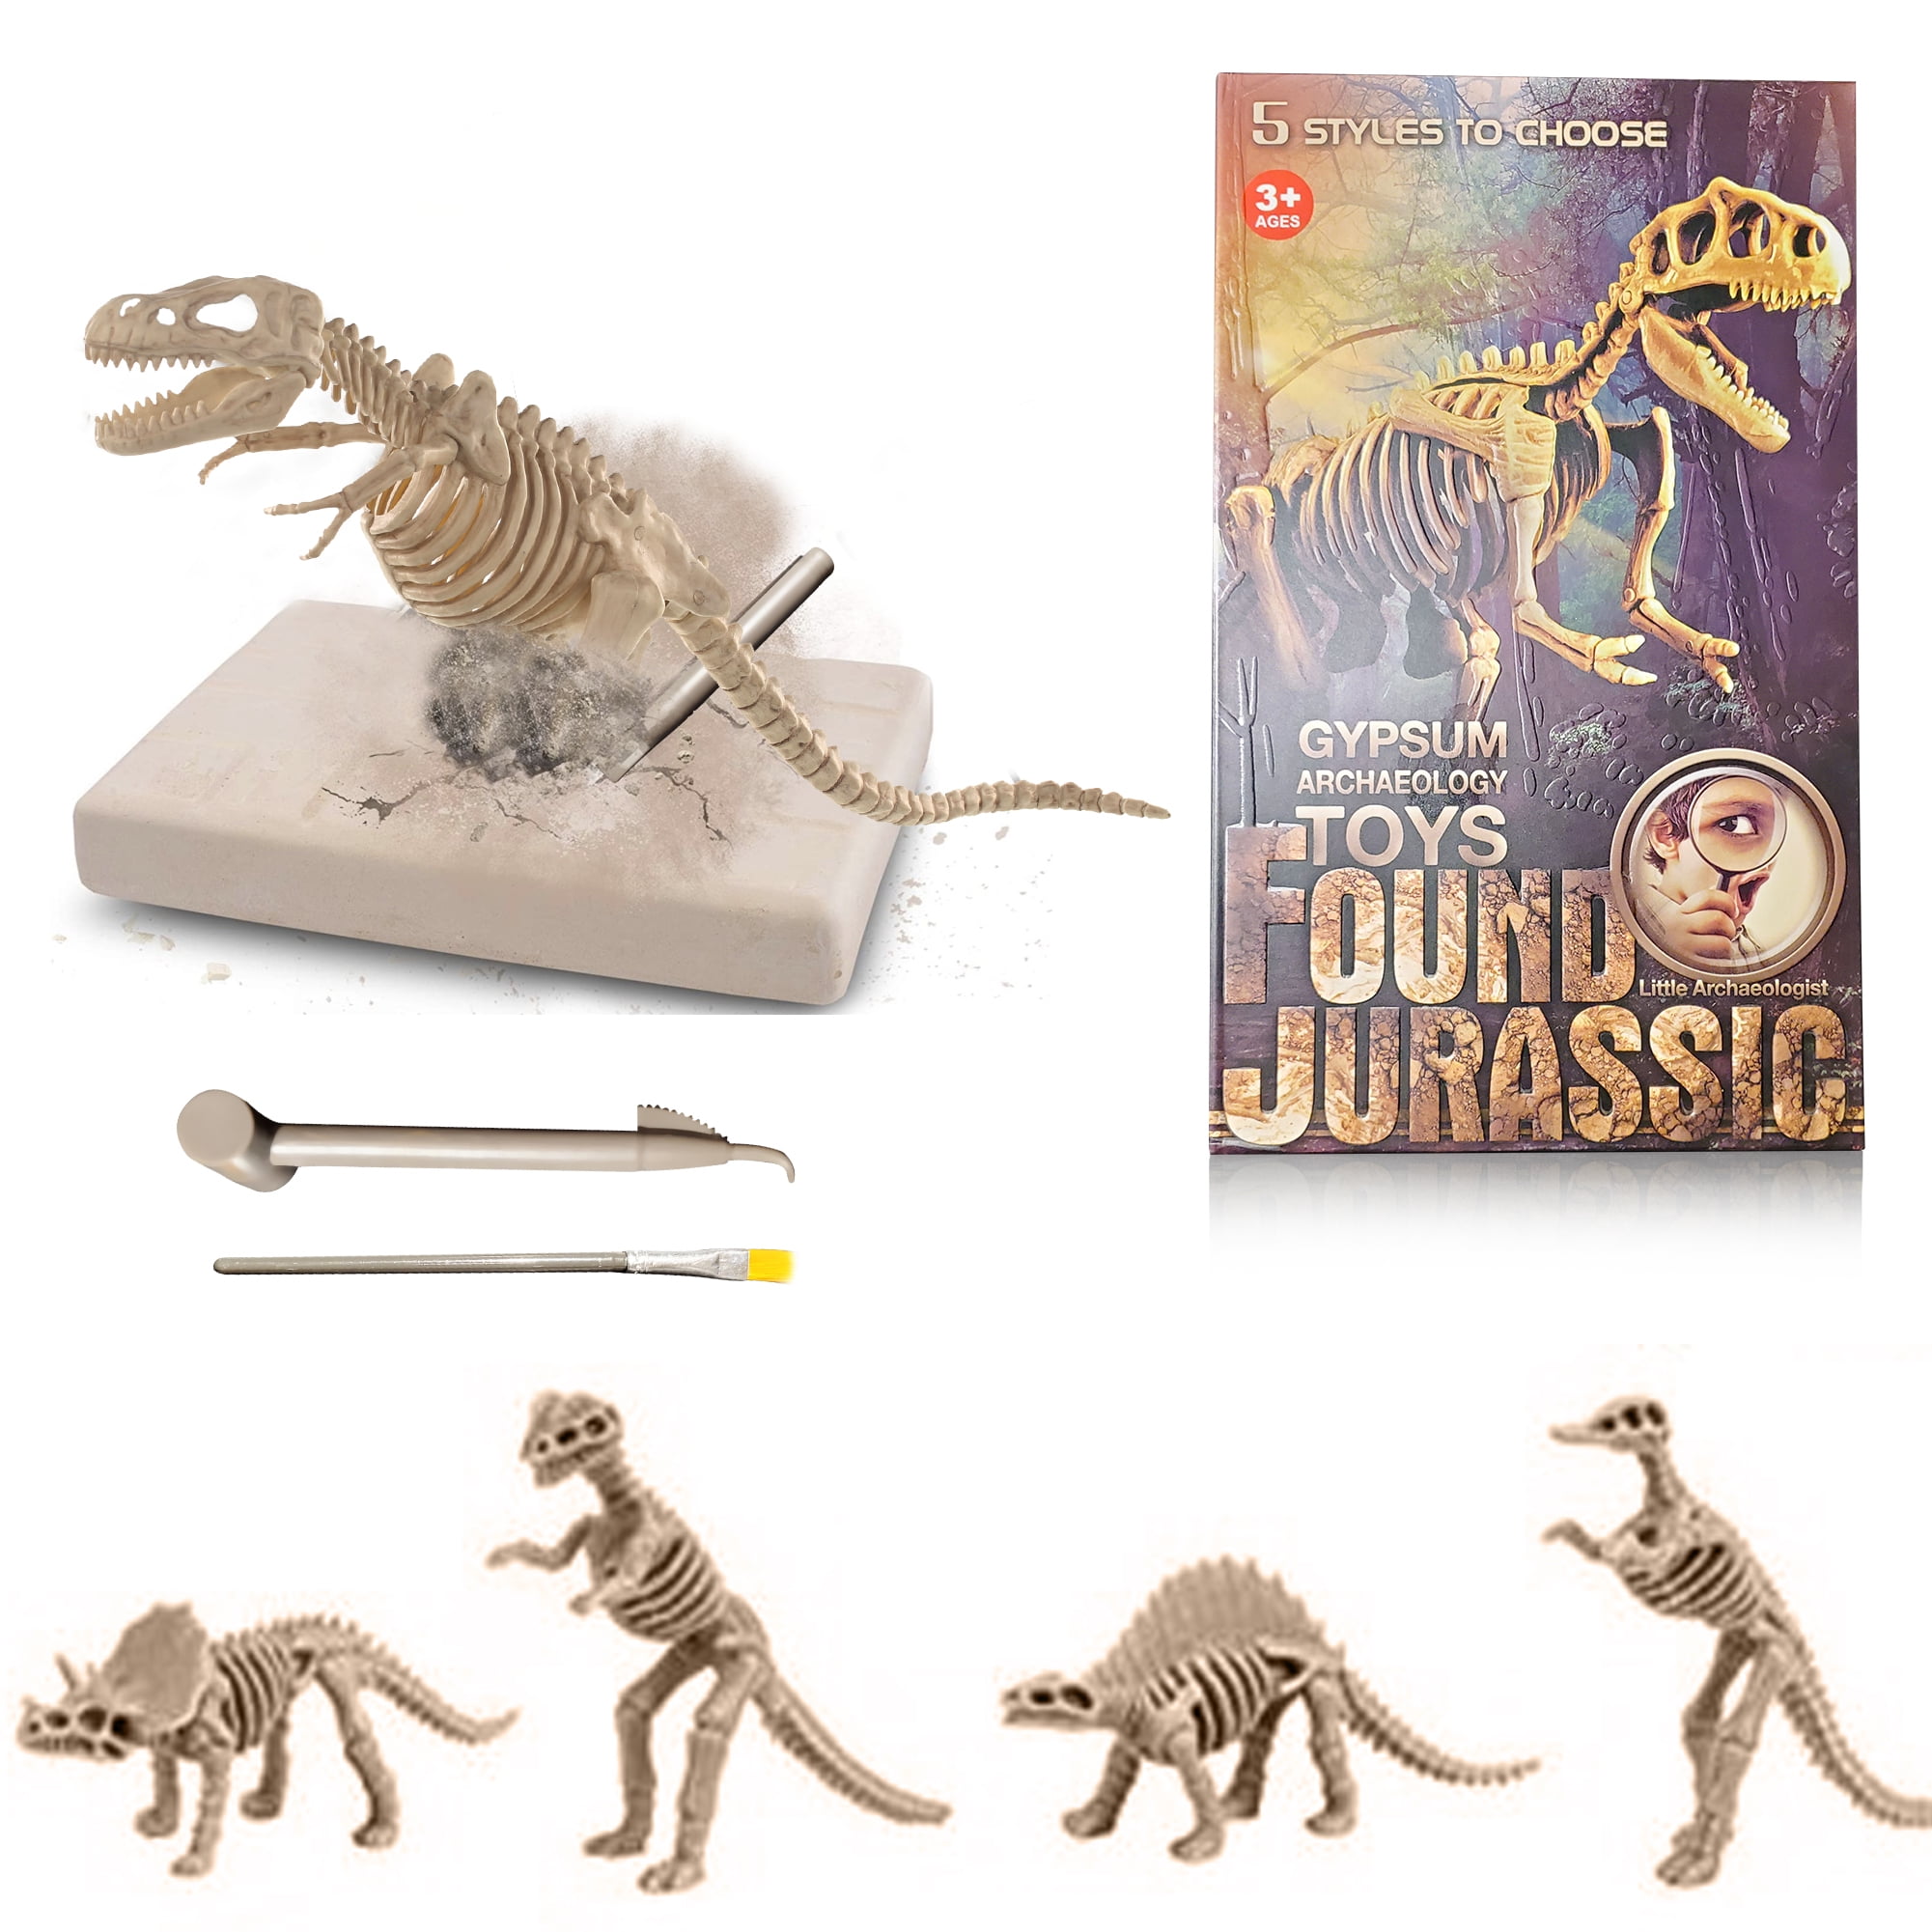 Maydear Archaeology Discovery Digging Kit for Kids Dinosaur Bone Excavation Kit 